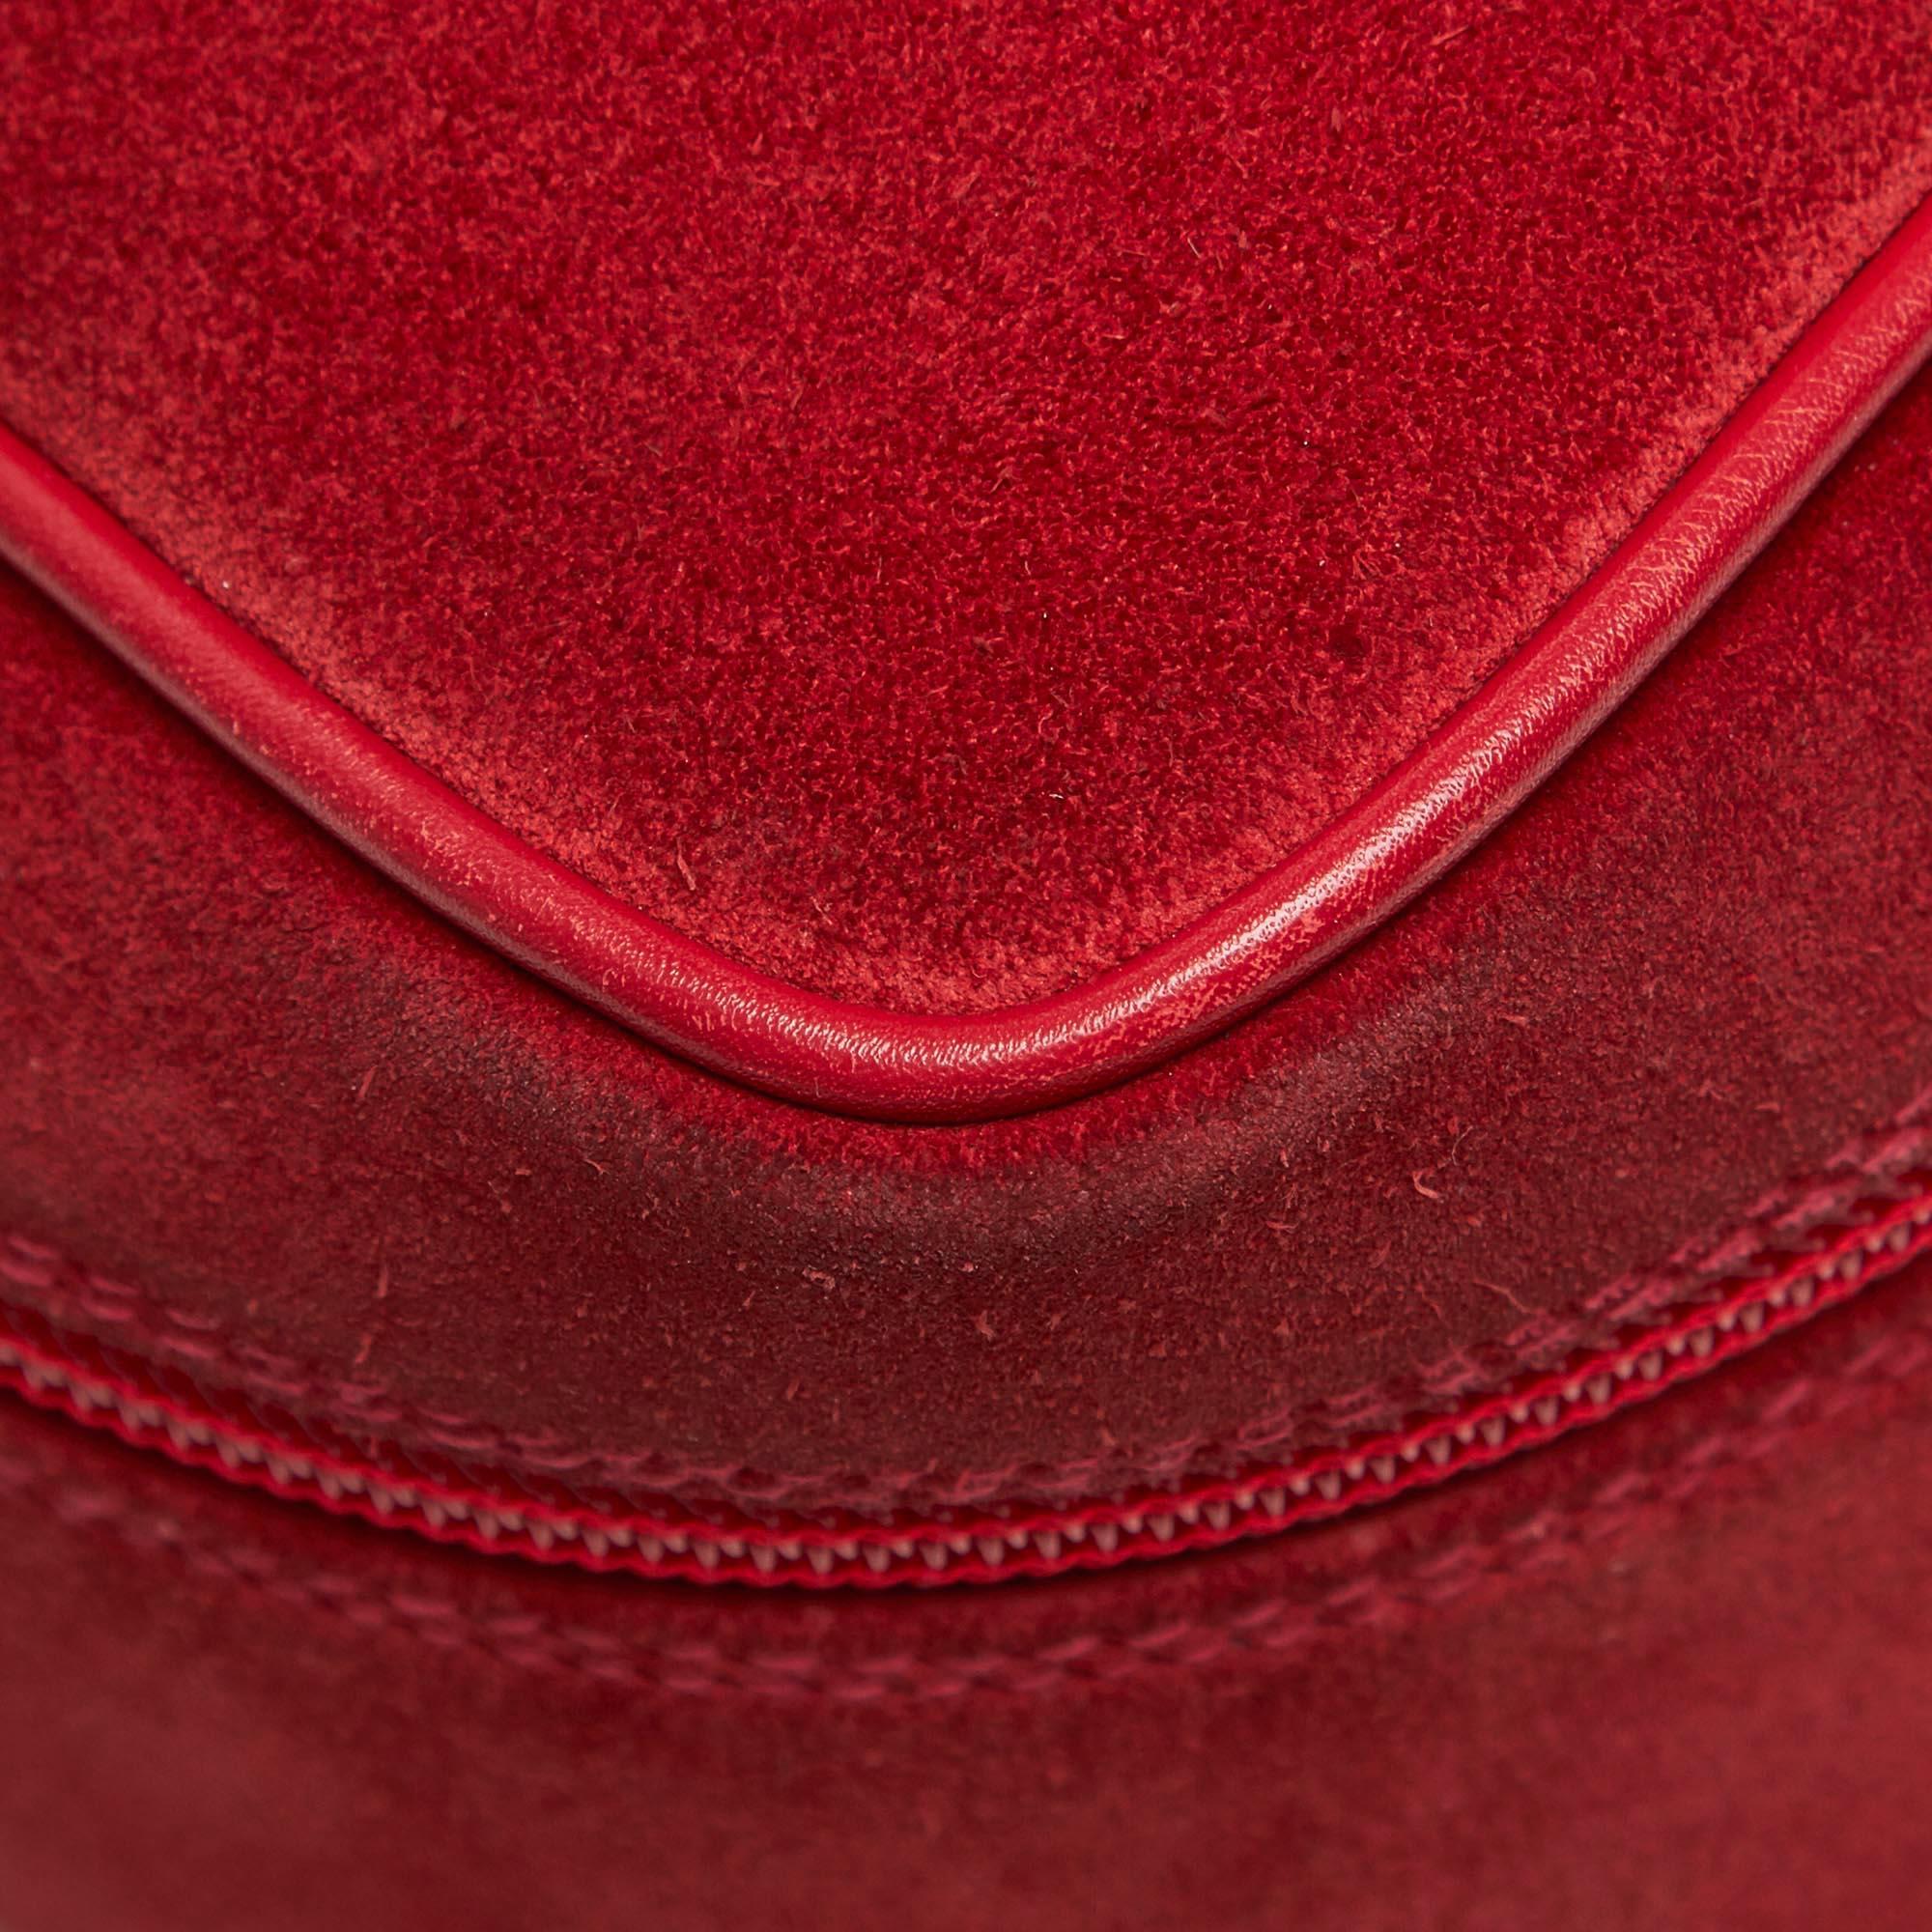 Gucci Red Leather Vanity Bag For Sale 7